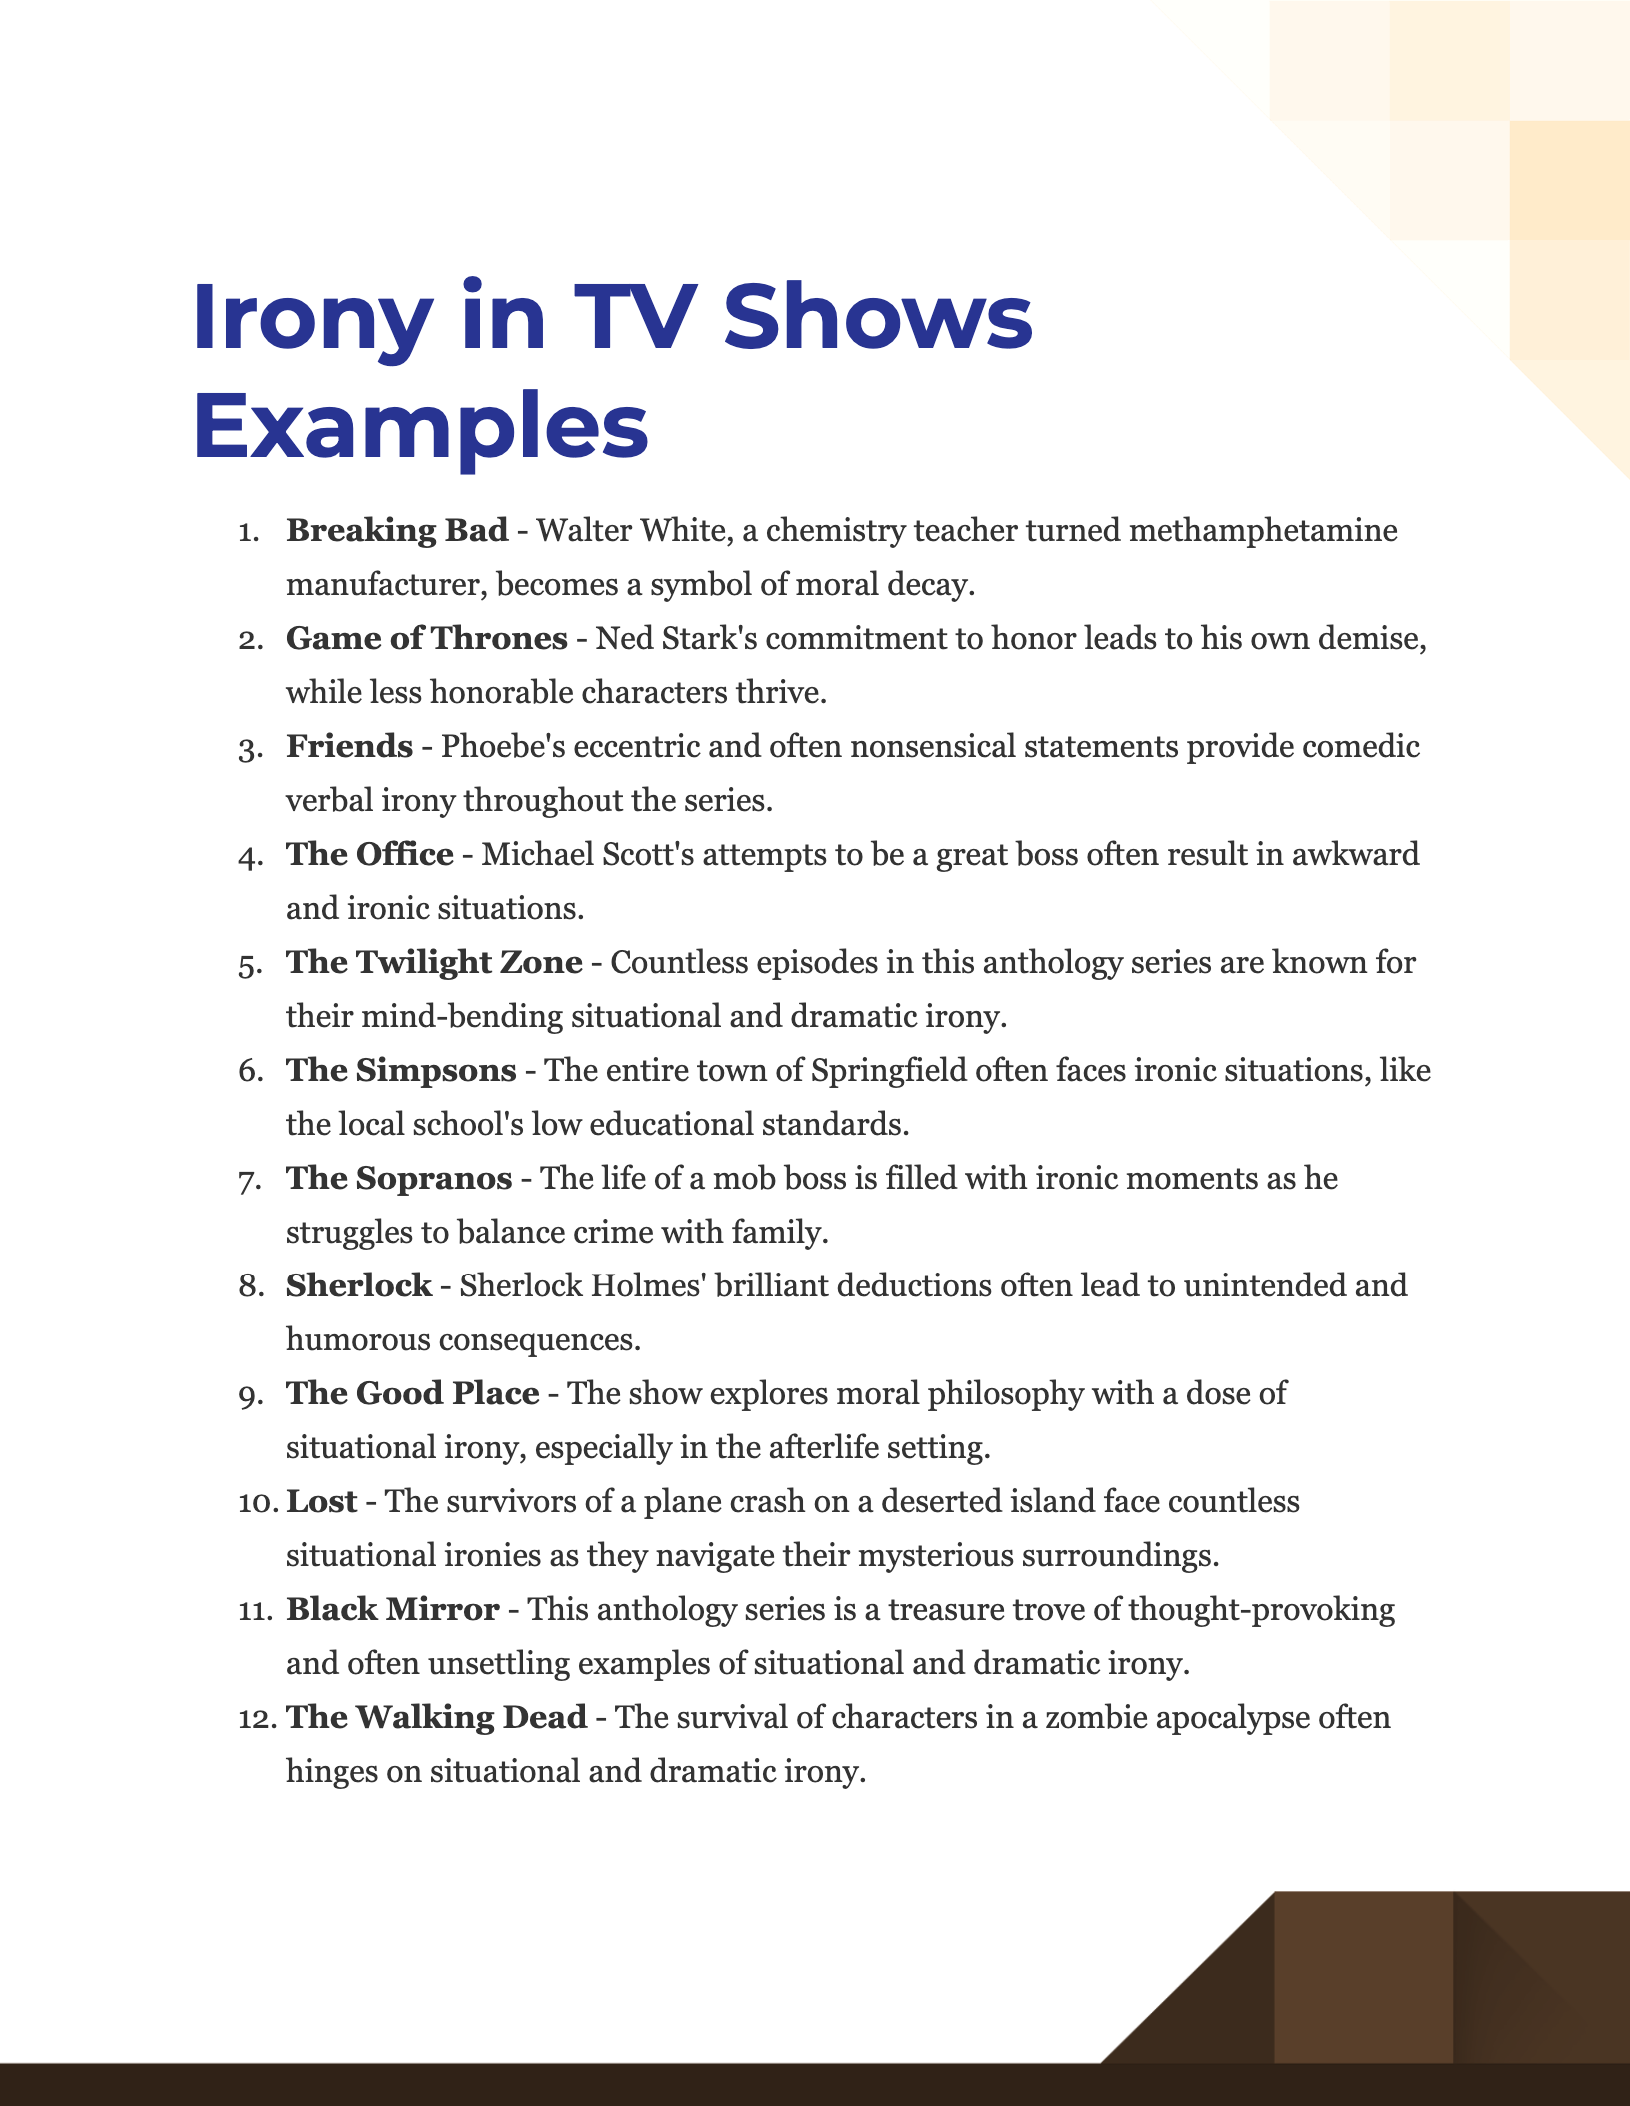 Irony in TV Shows Examples